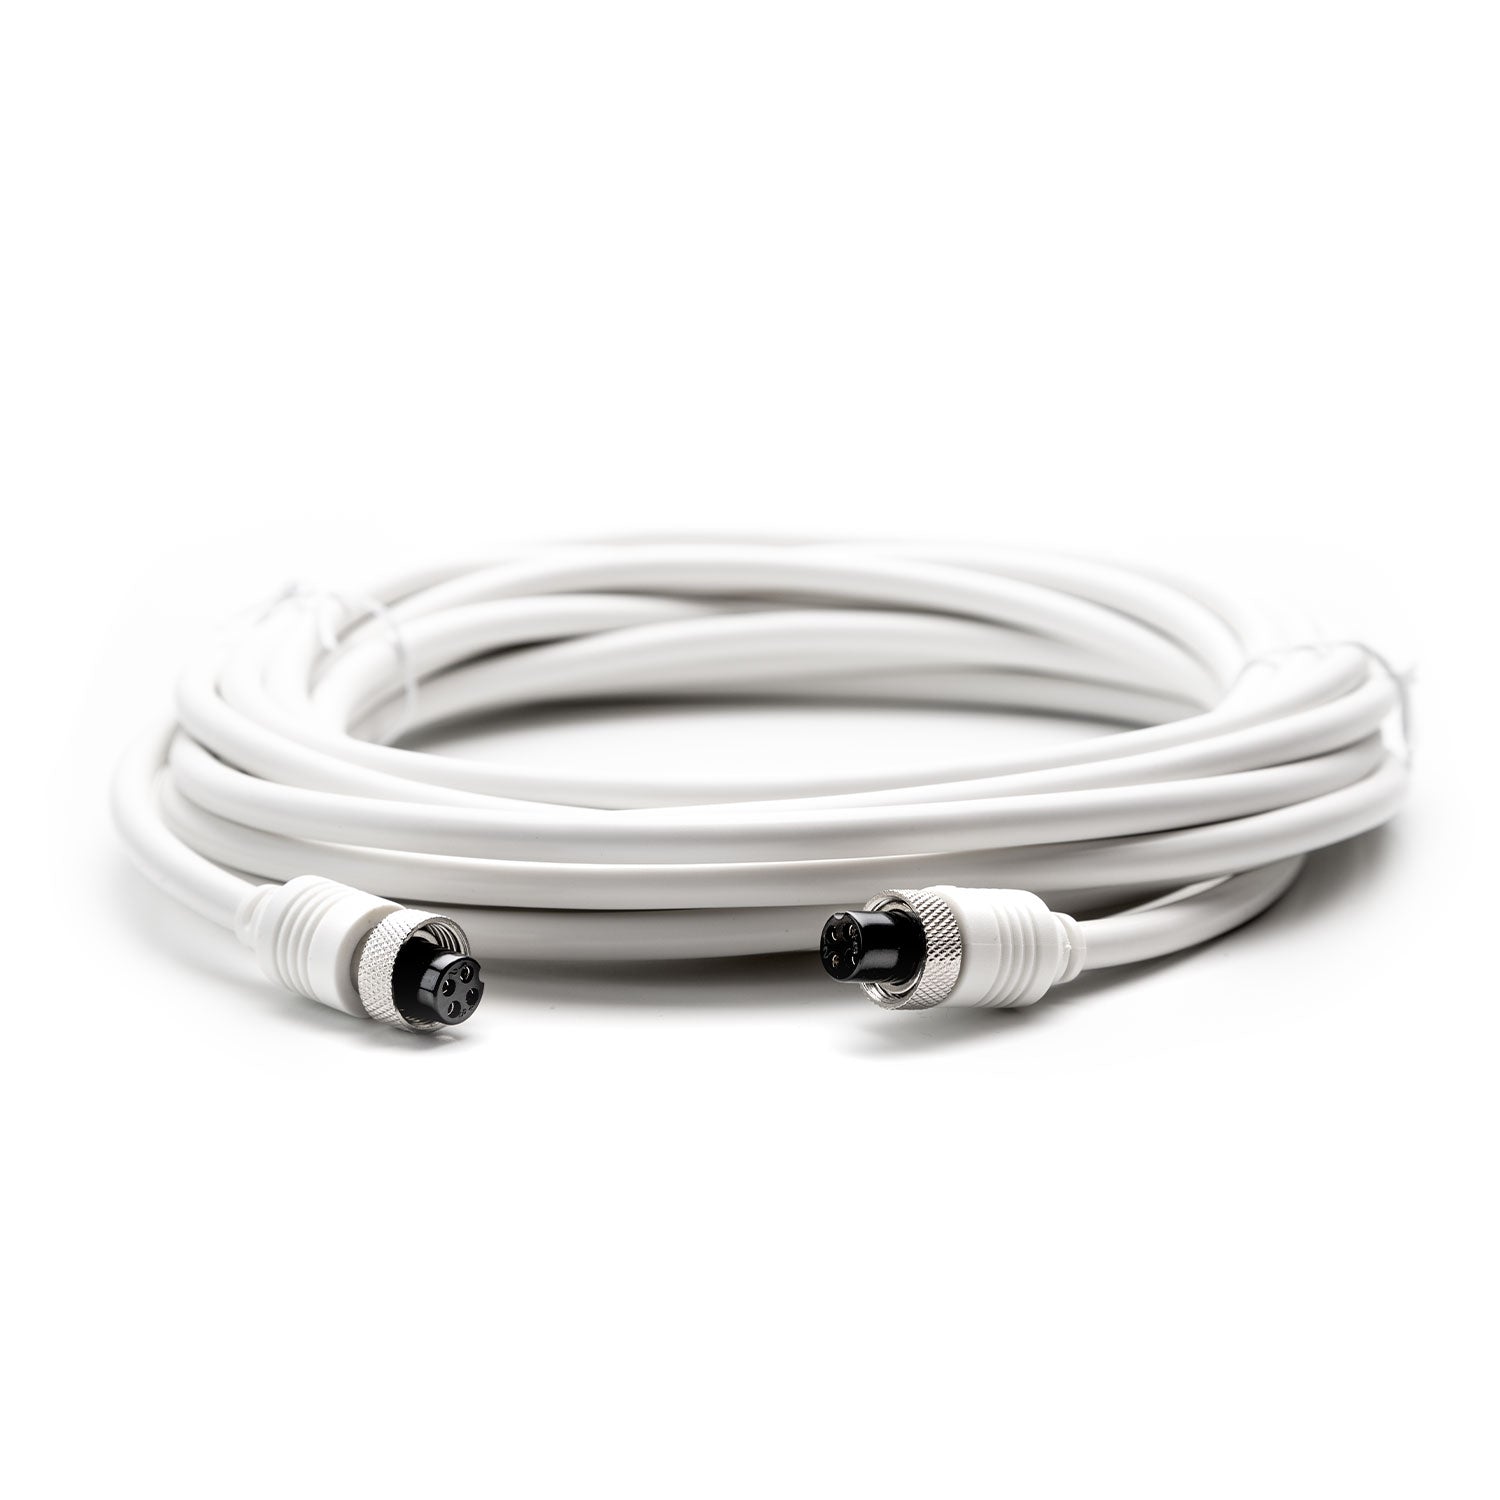 FORTE Speaker Cable